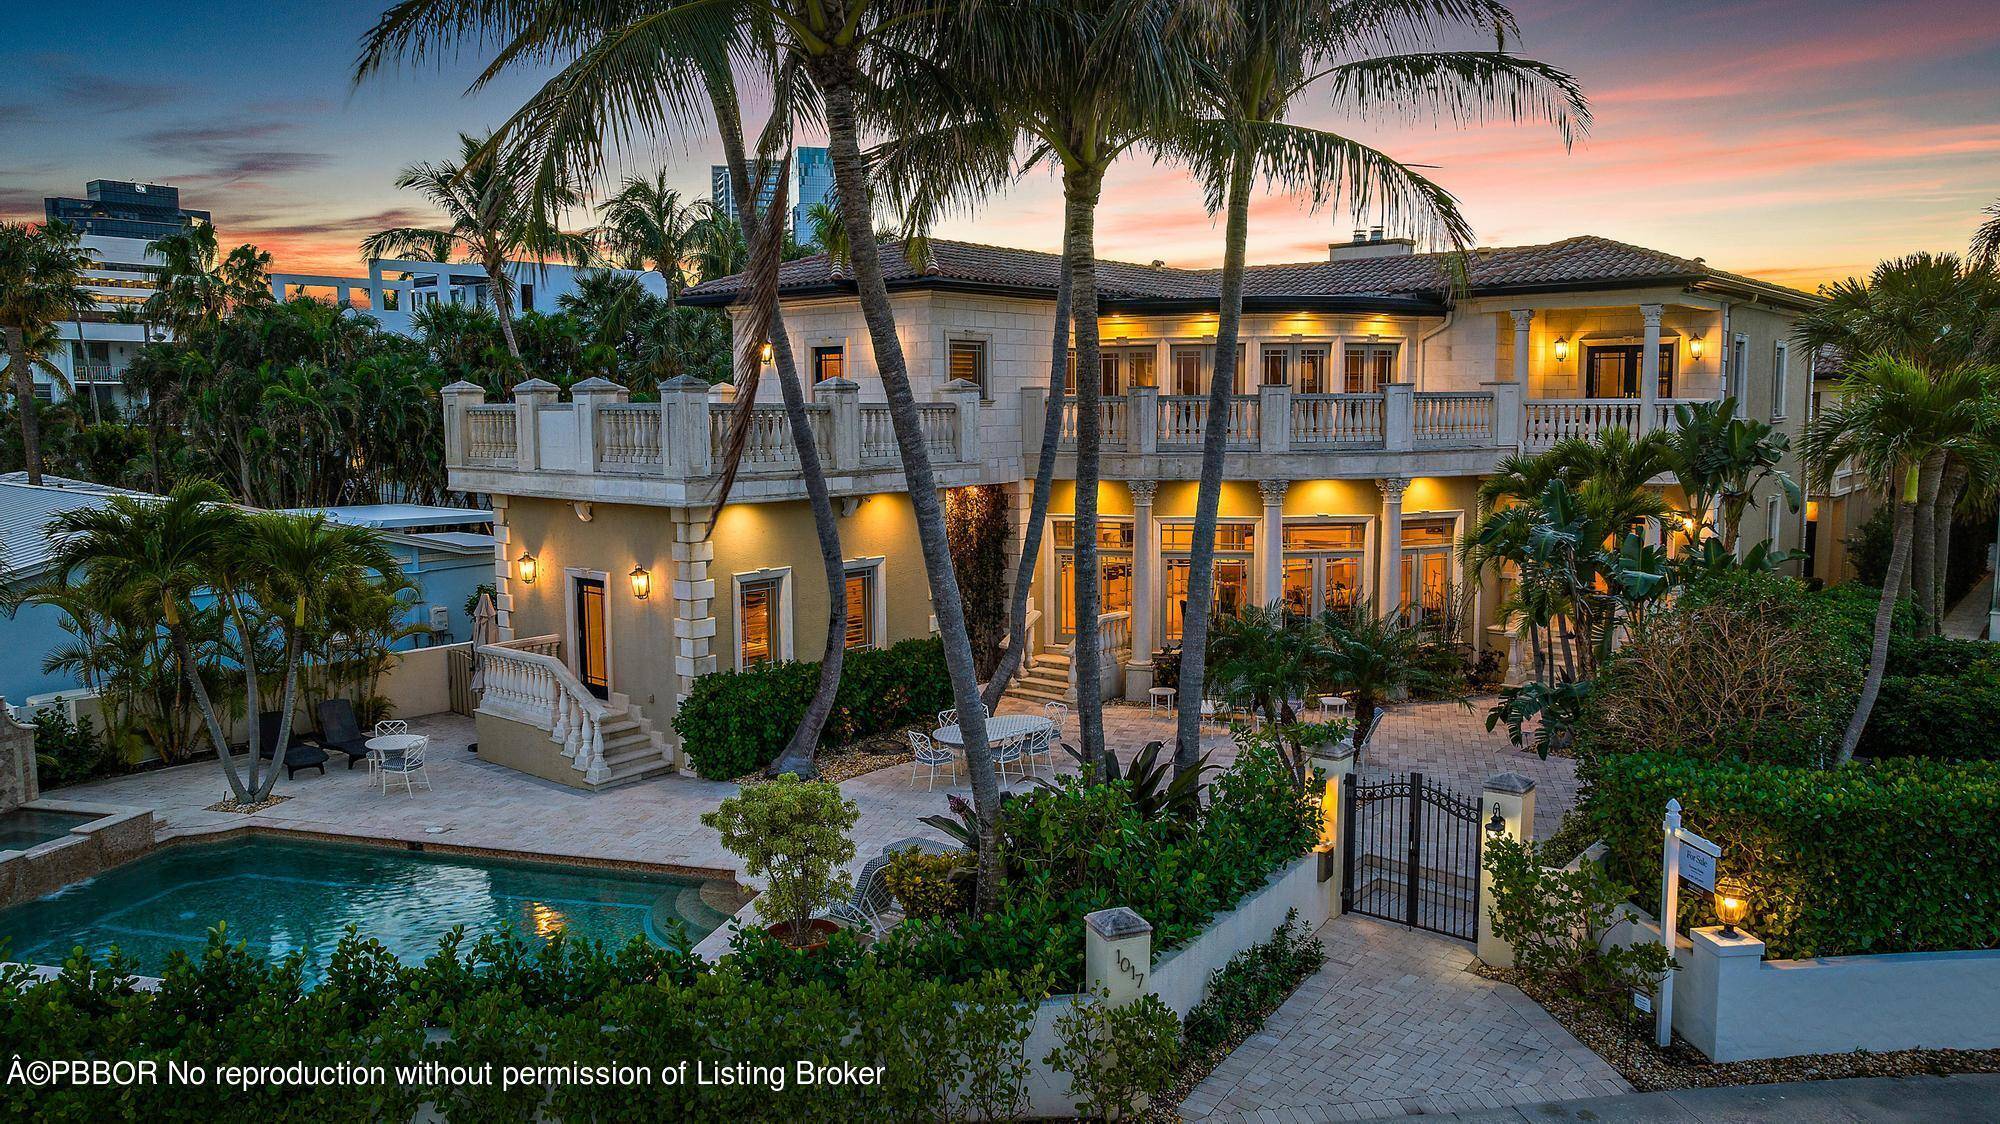 Waterfront Mediterranean home with fabulous water views of Palm Beach Island.